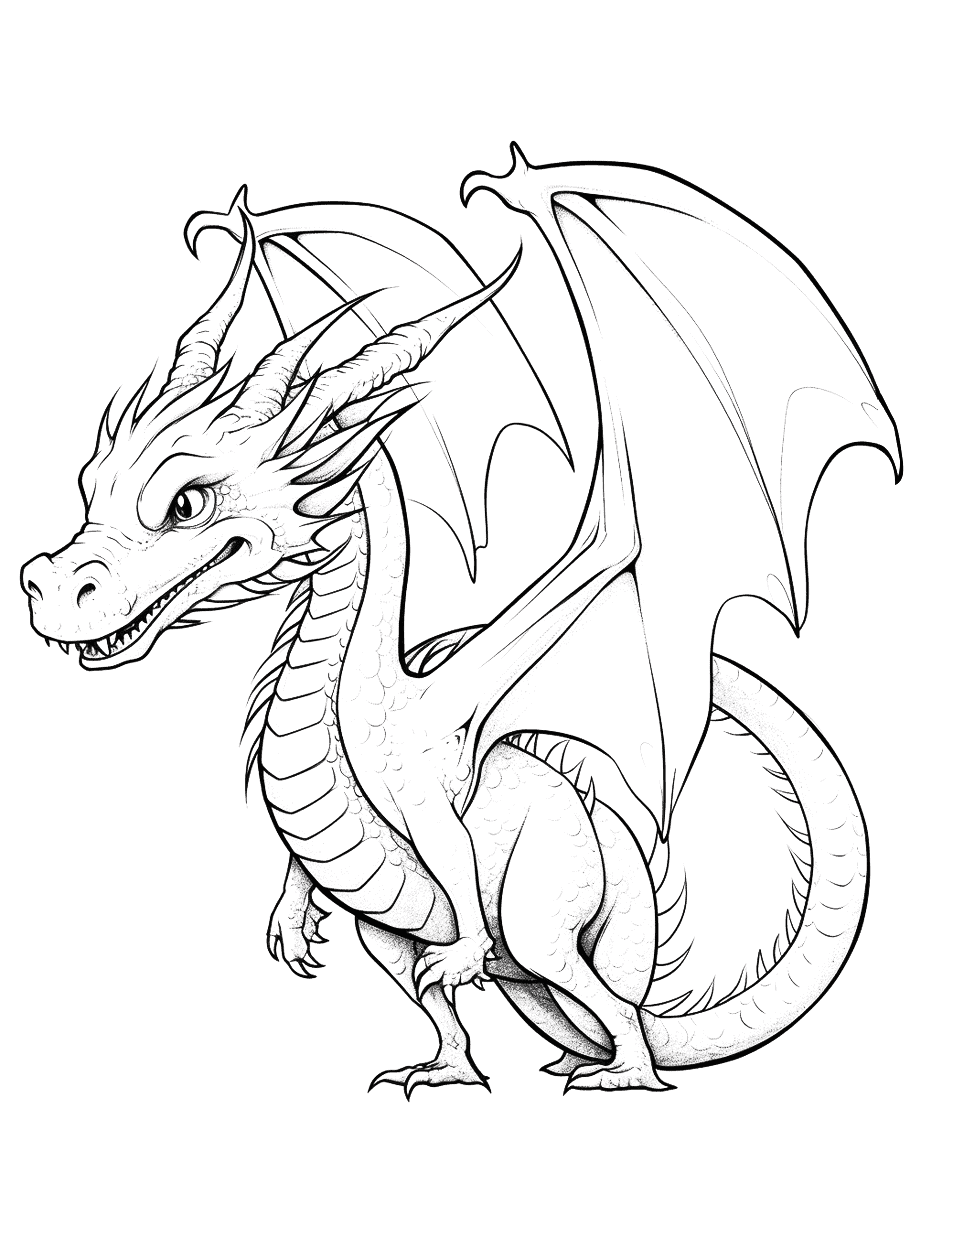 Dragon Drawing Coloring Page - A detailed dragon drawing showcasing every scale and claw.